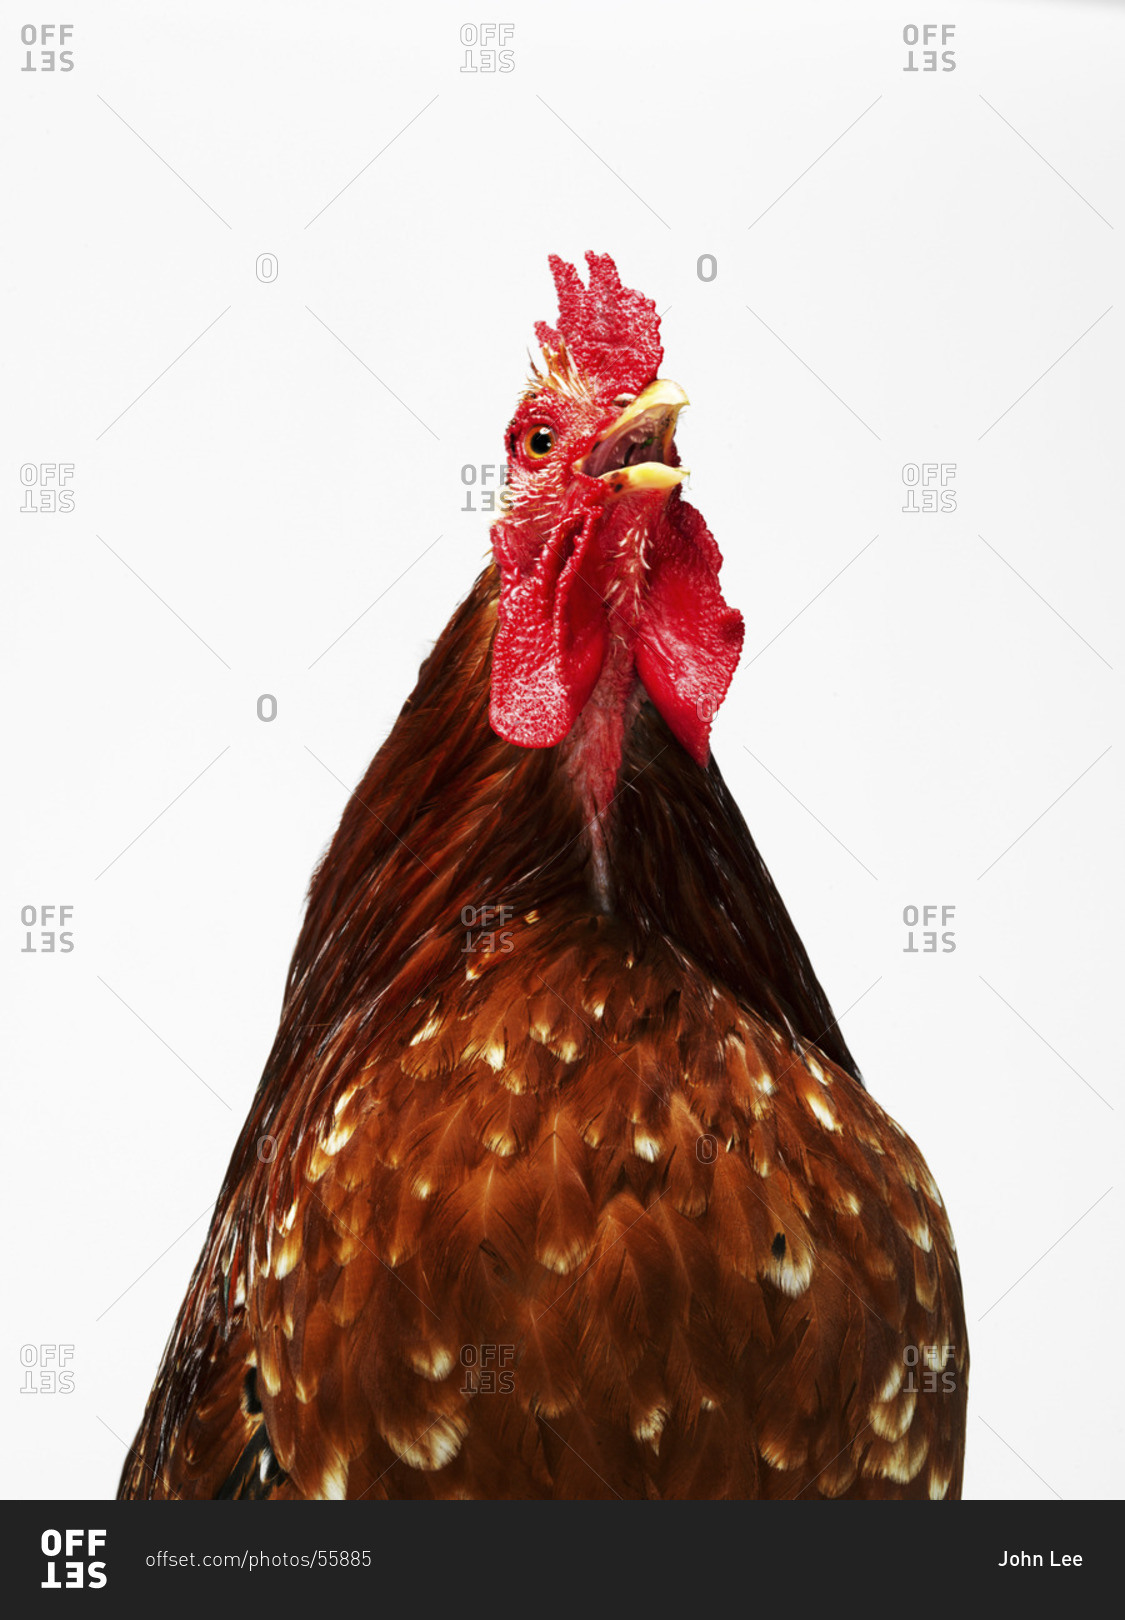 Chicken isolated on white background